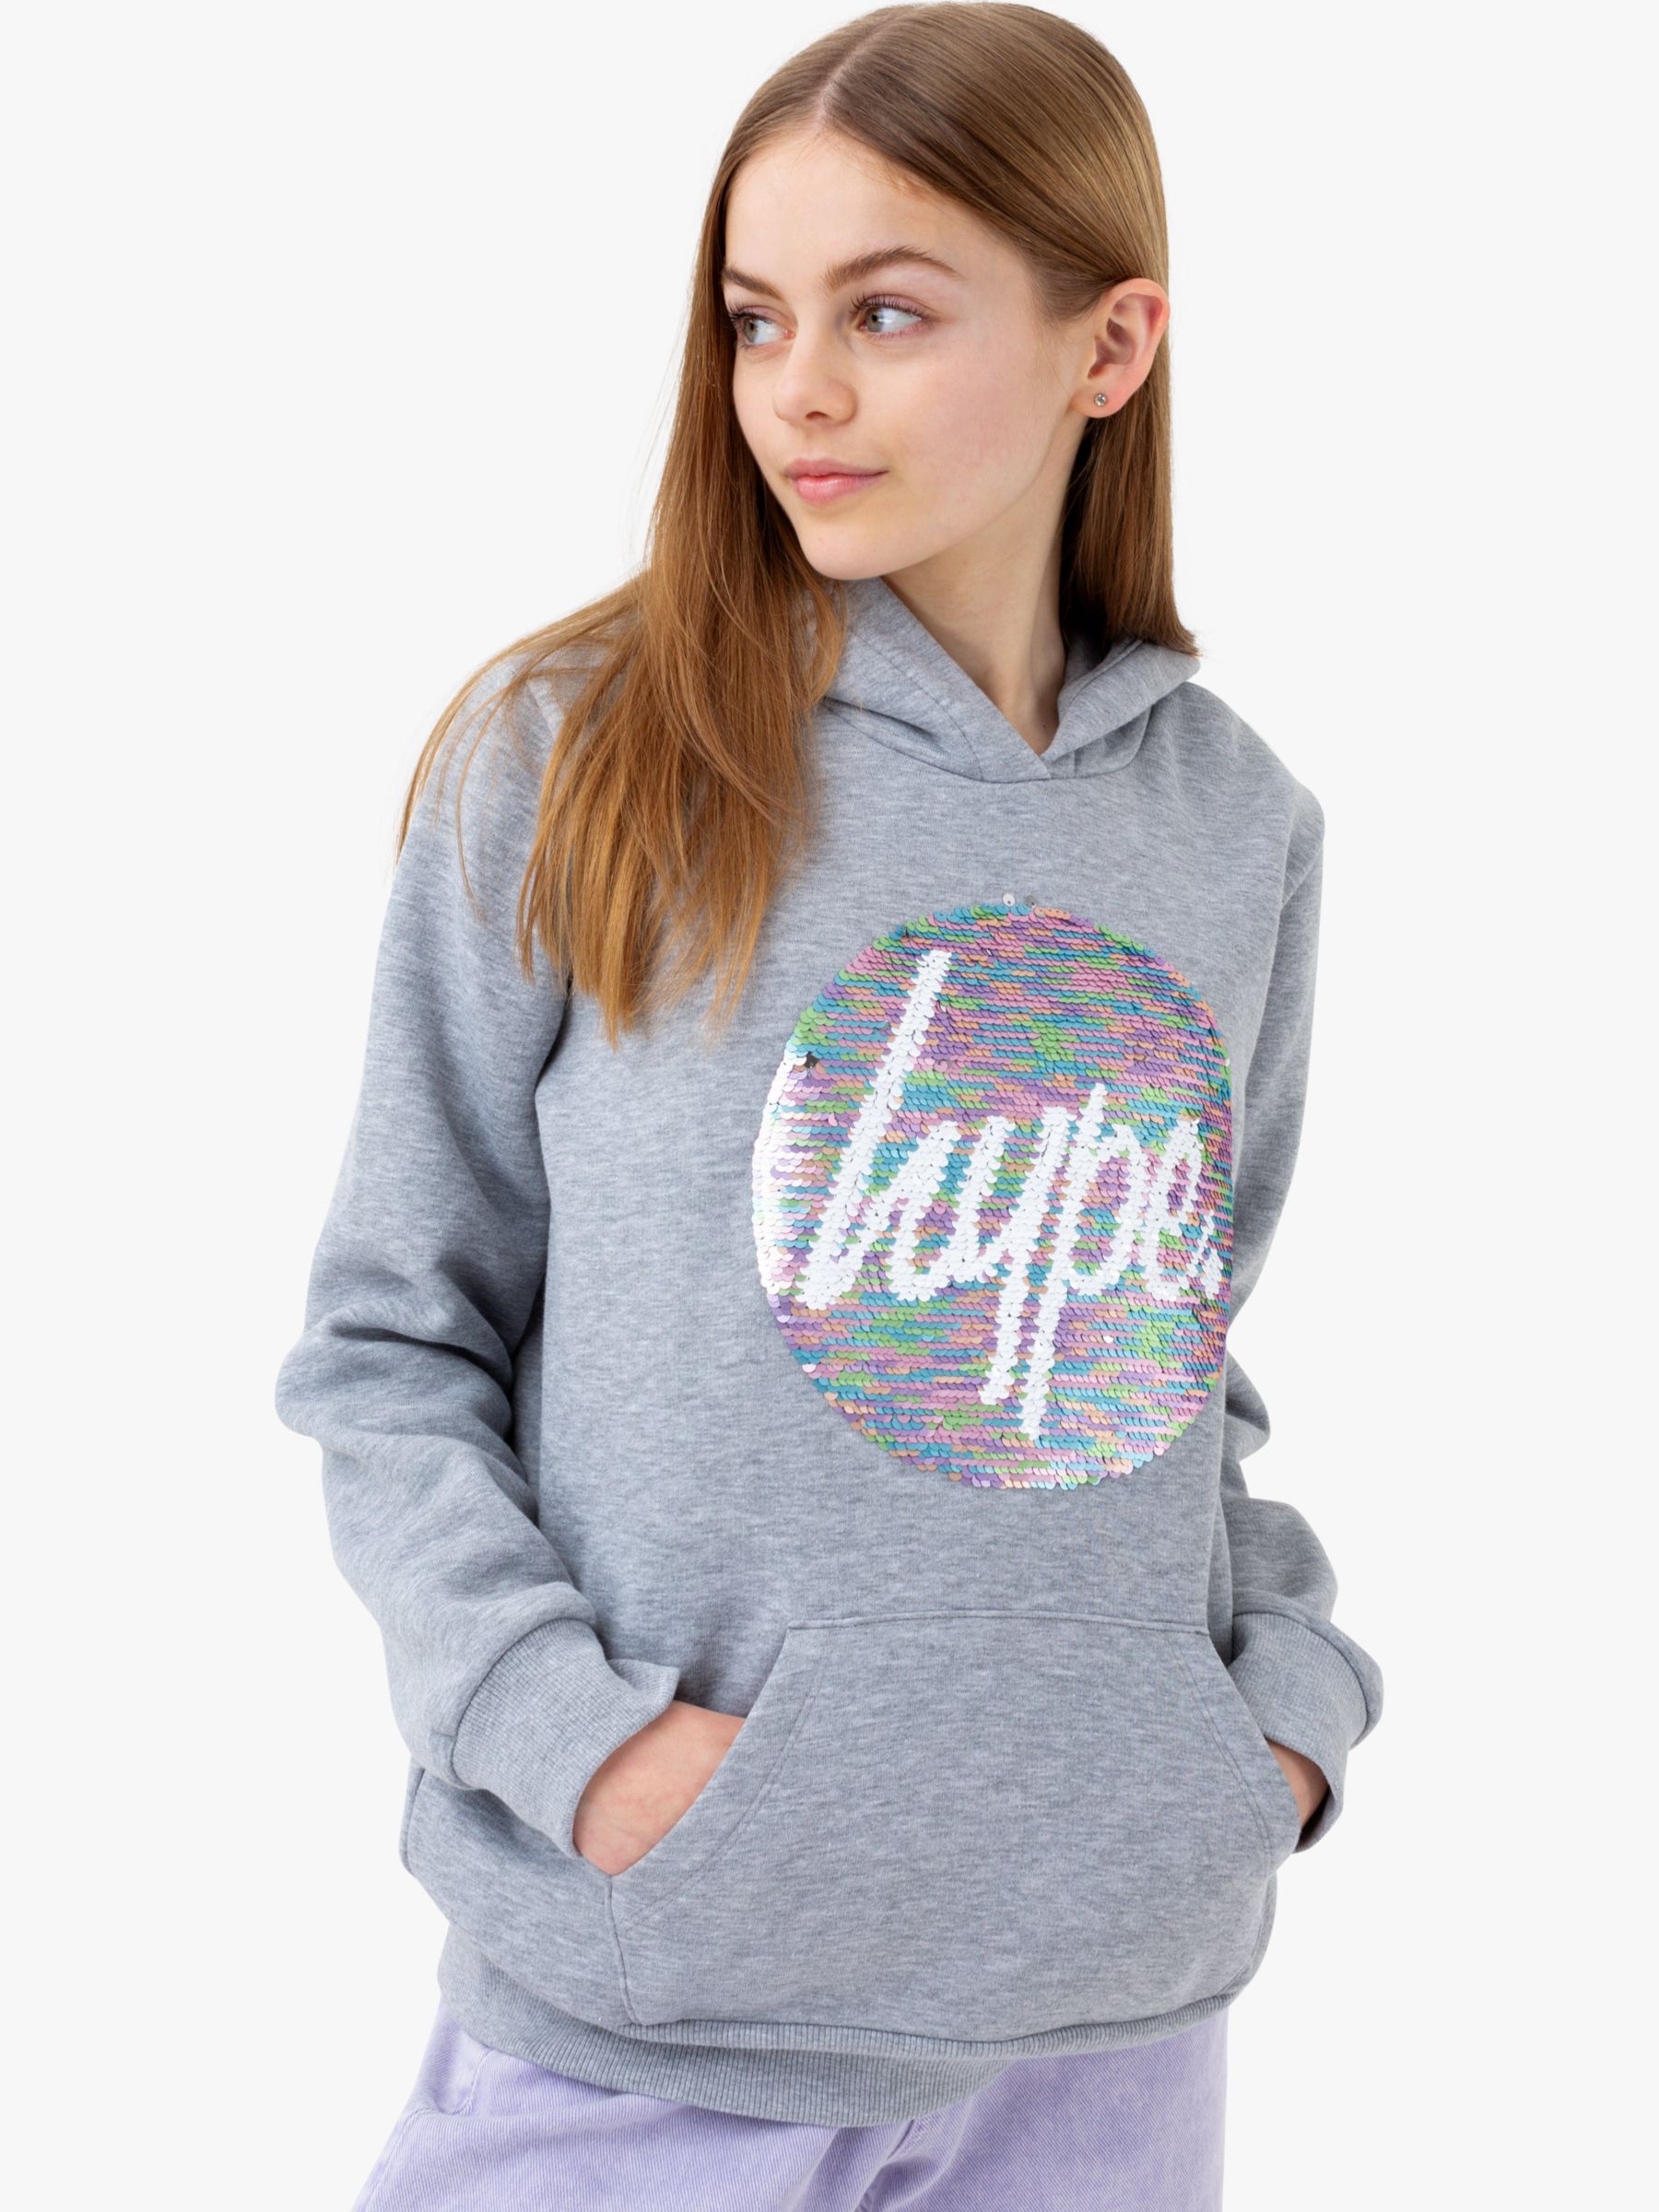 Hype Hype Kids Age 13 Girls Grey Cropped Sweatshirt With Tropical Design. 